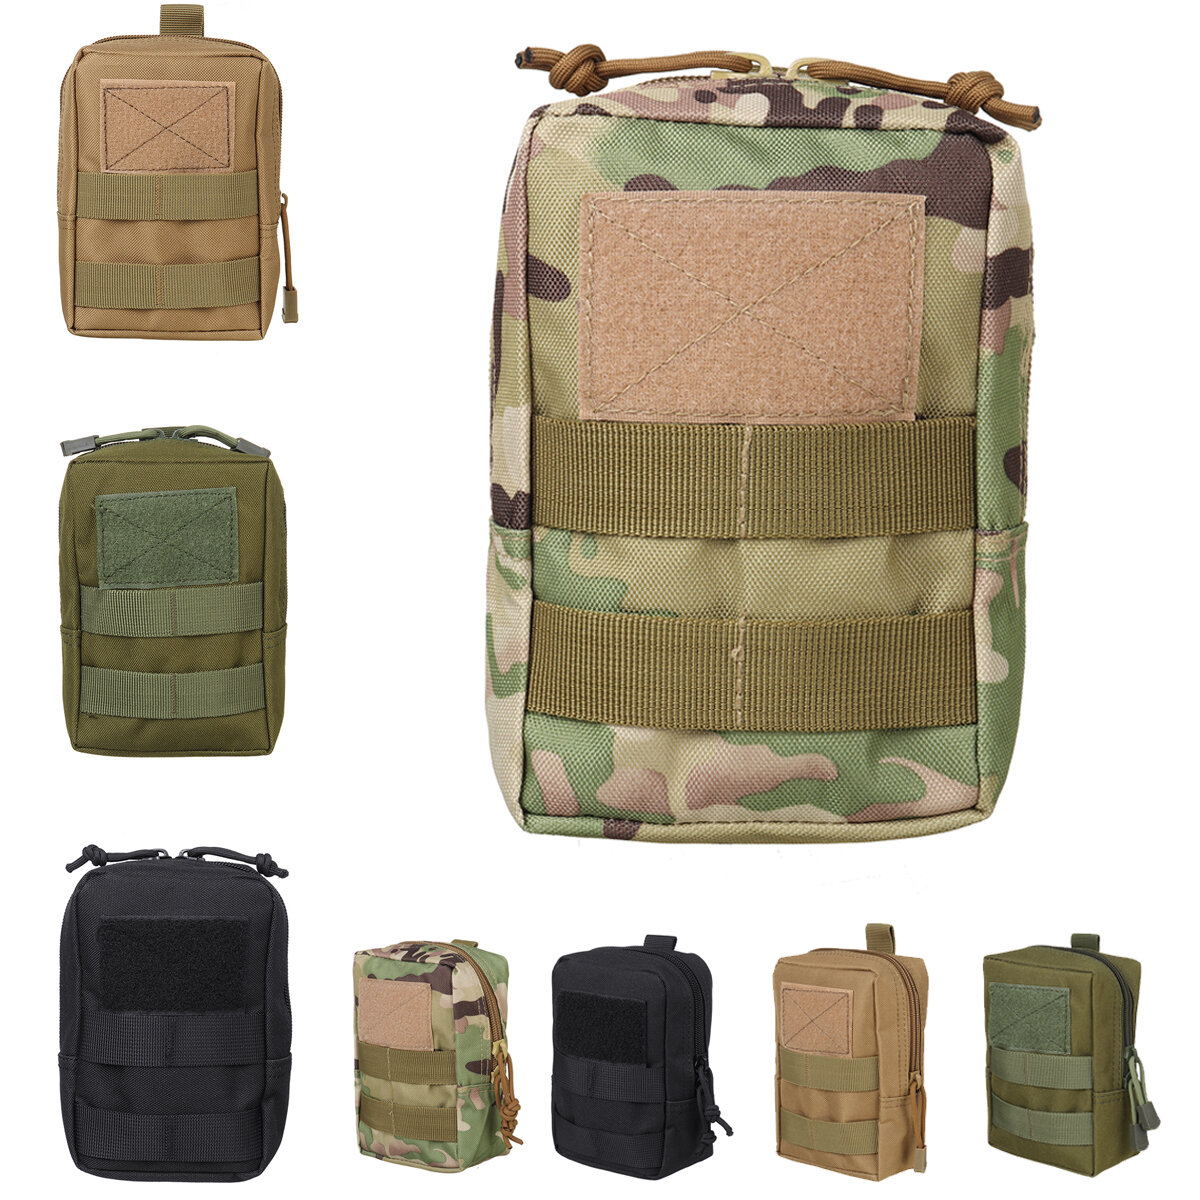 Military Tactical Camo Belt Pouch Bag Pack Phone Bags Molle Pouch Camping Waist Pocket Bag Phone Cas